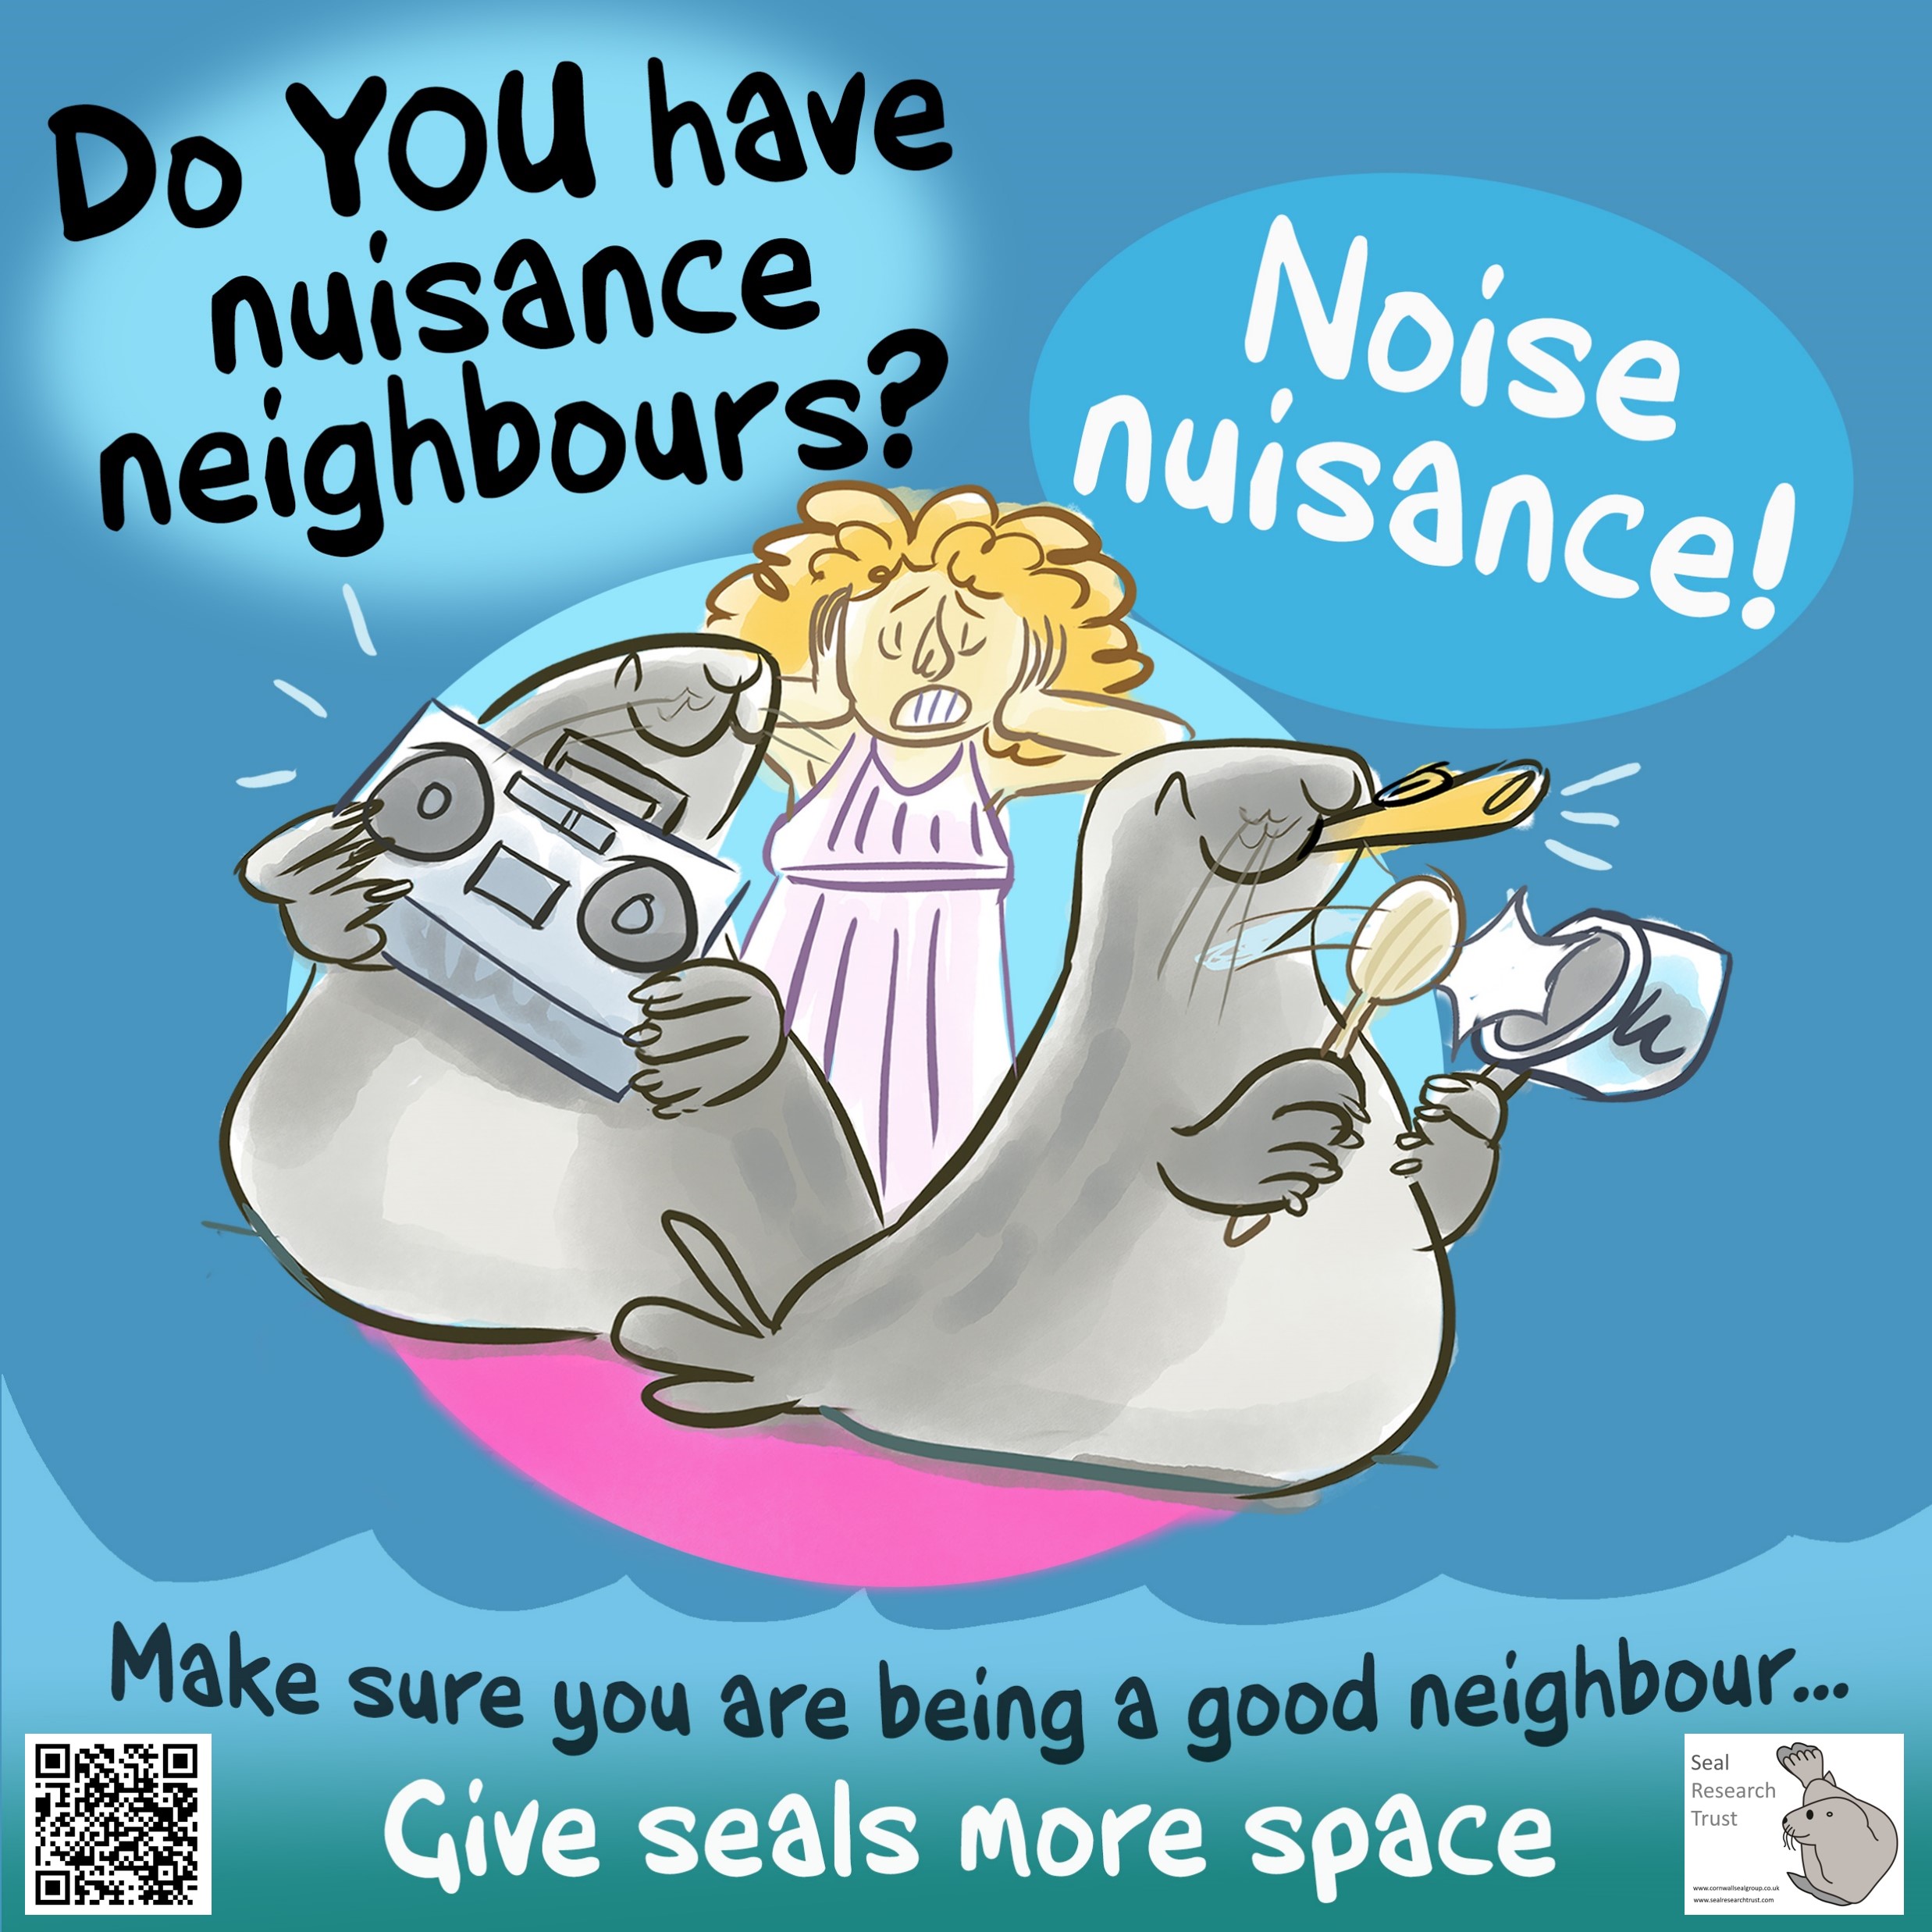 A social media graphic encouraging people to be better neighbours when it comes to noise around seals